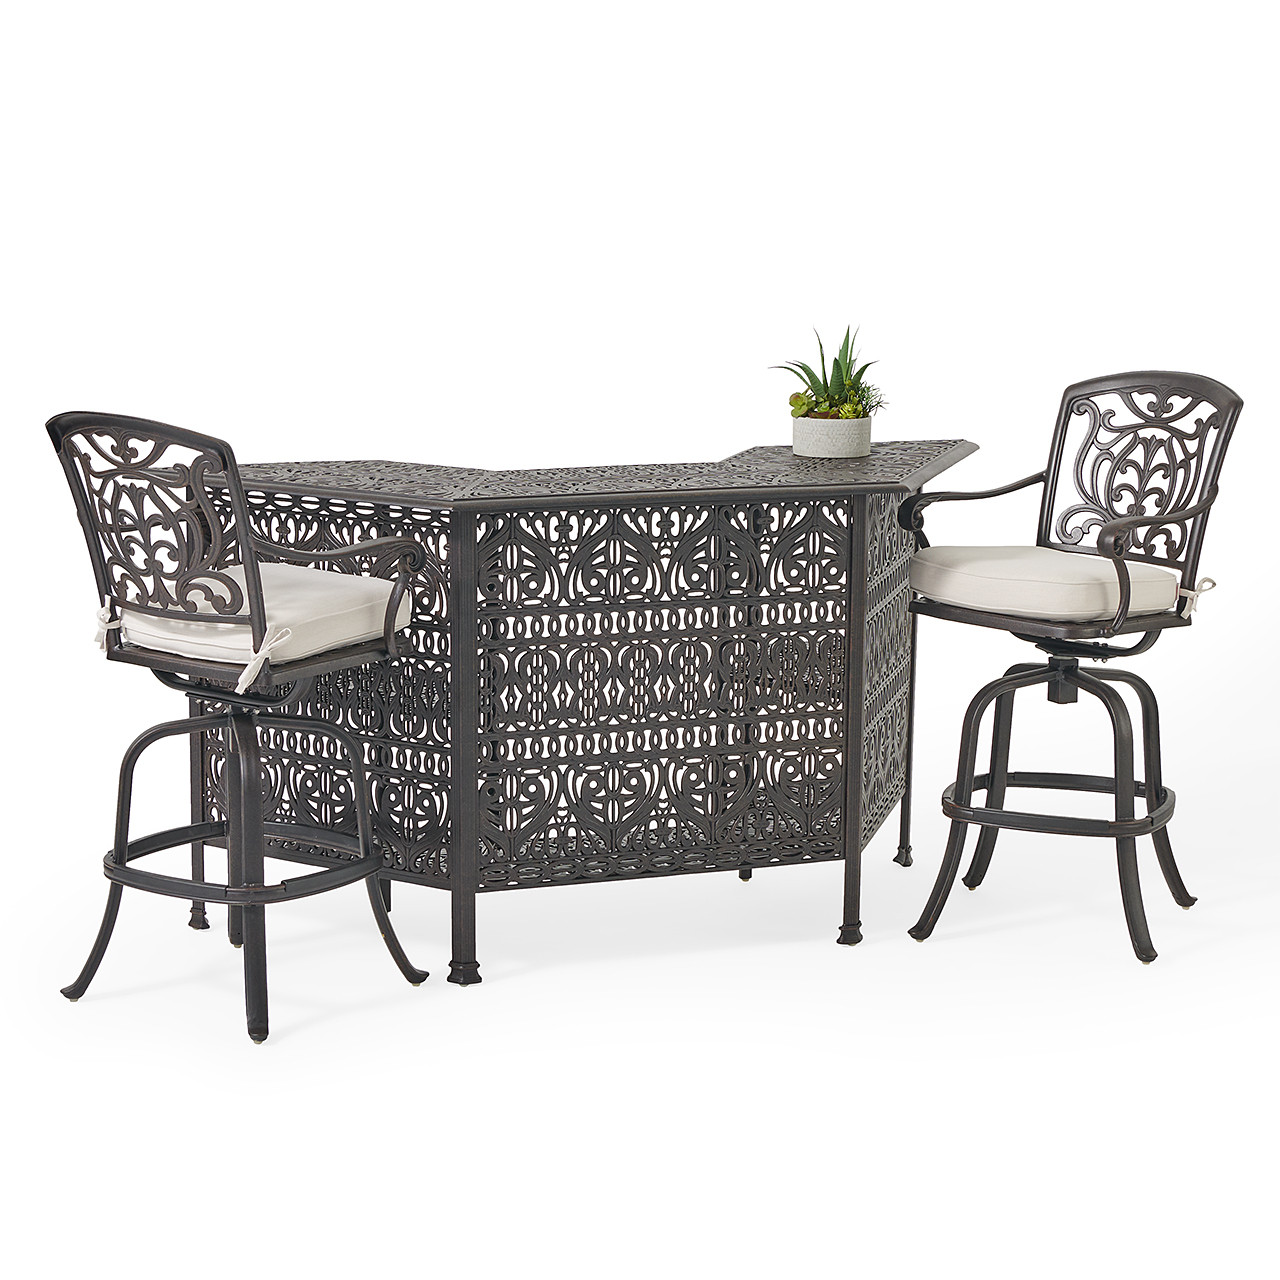 Verona Desert Bronze Cast Aluminum with Cushions 3 Piece Party Set + 82 in. Party Bar